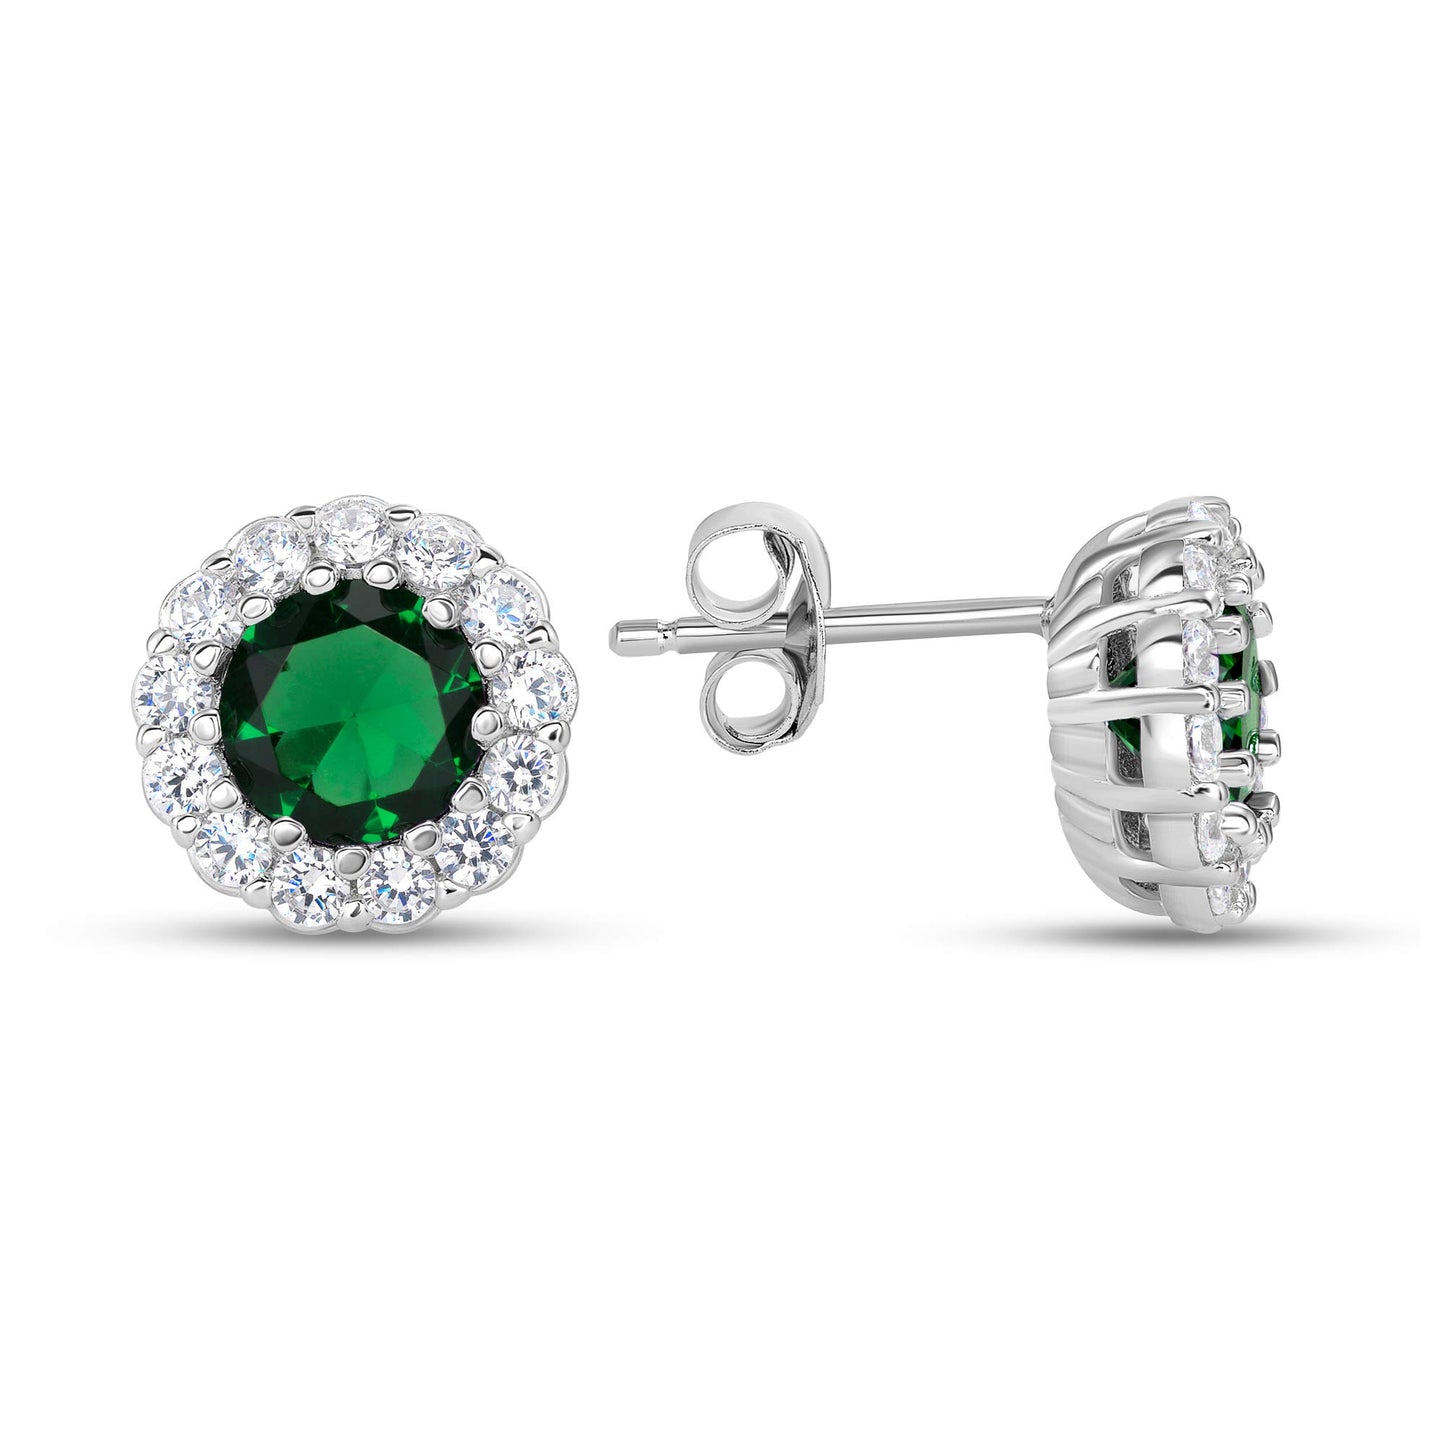 Silver 925 Rhodium Plated Green Cubic Zirconia Round Stud Earring. BE10708GRN